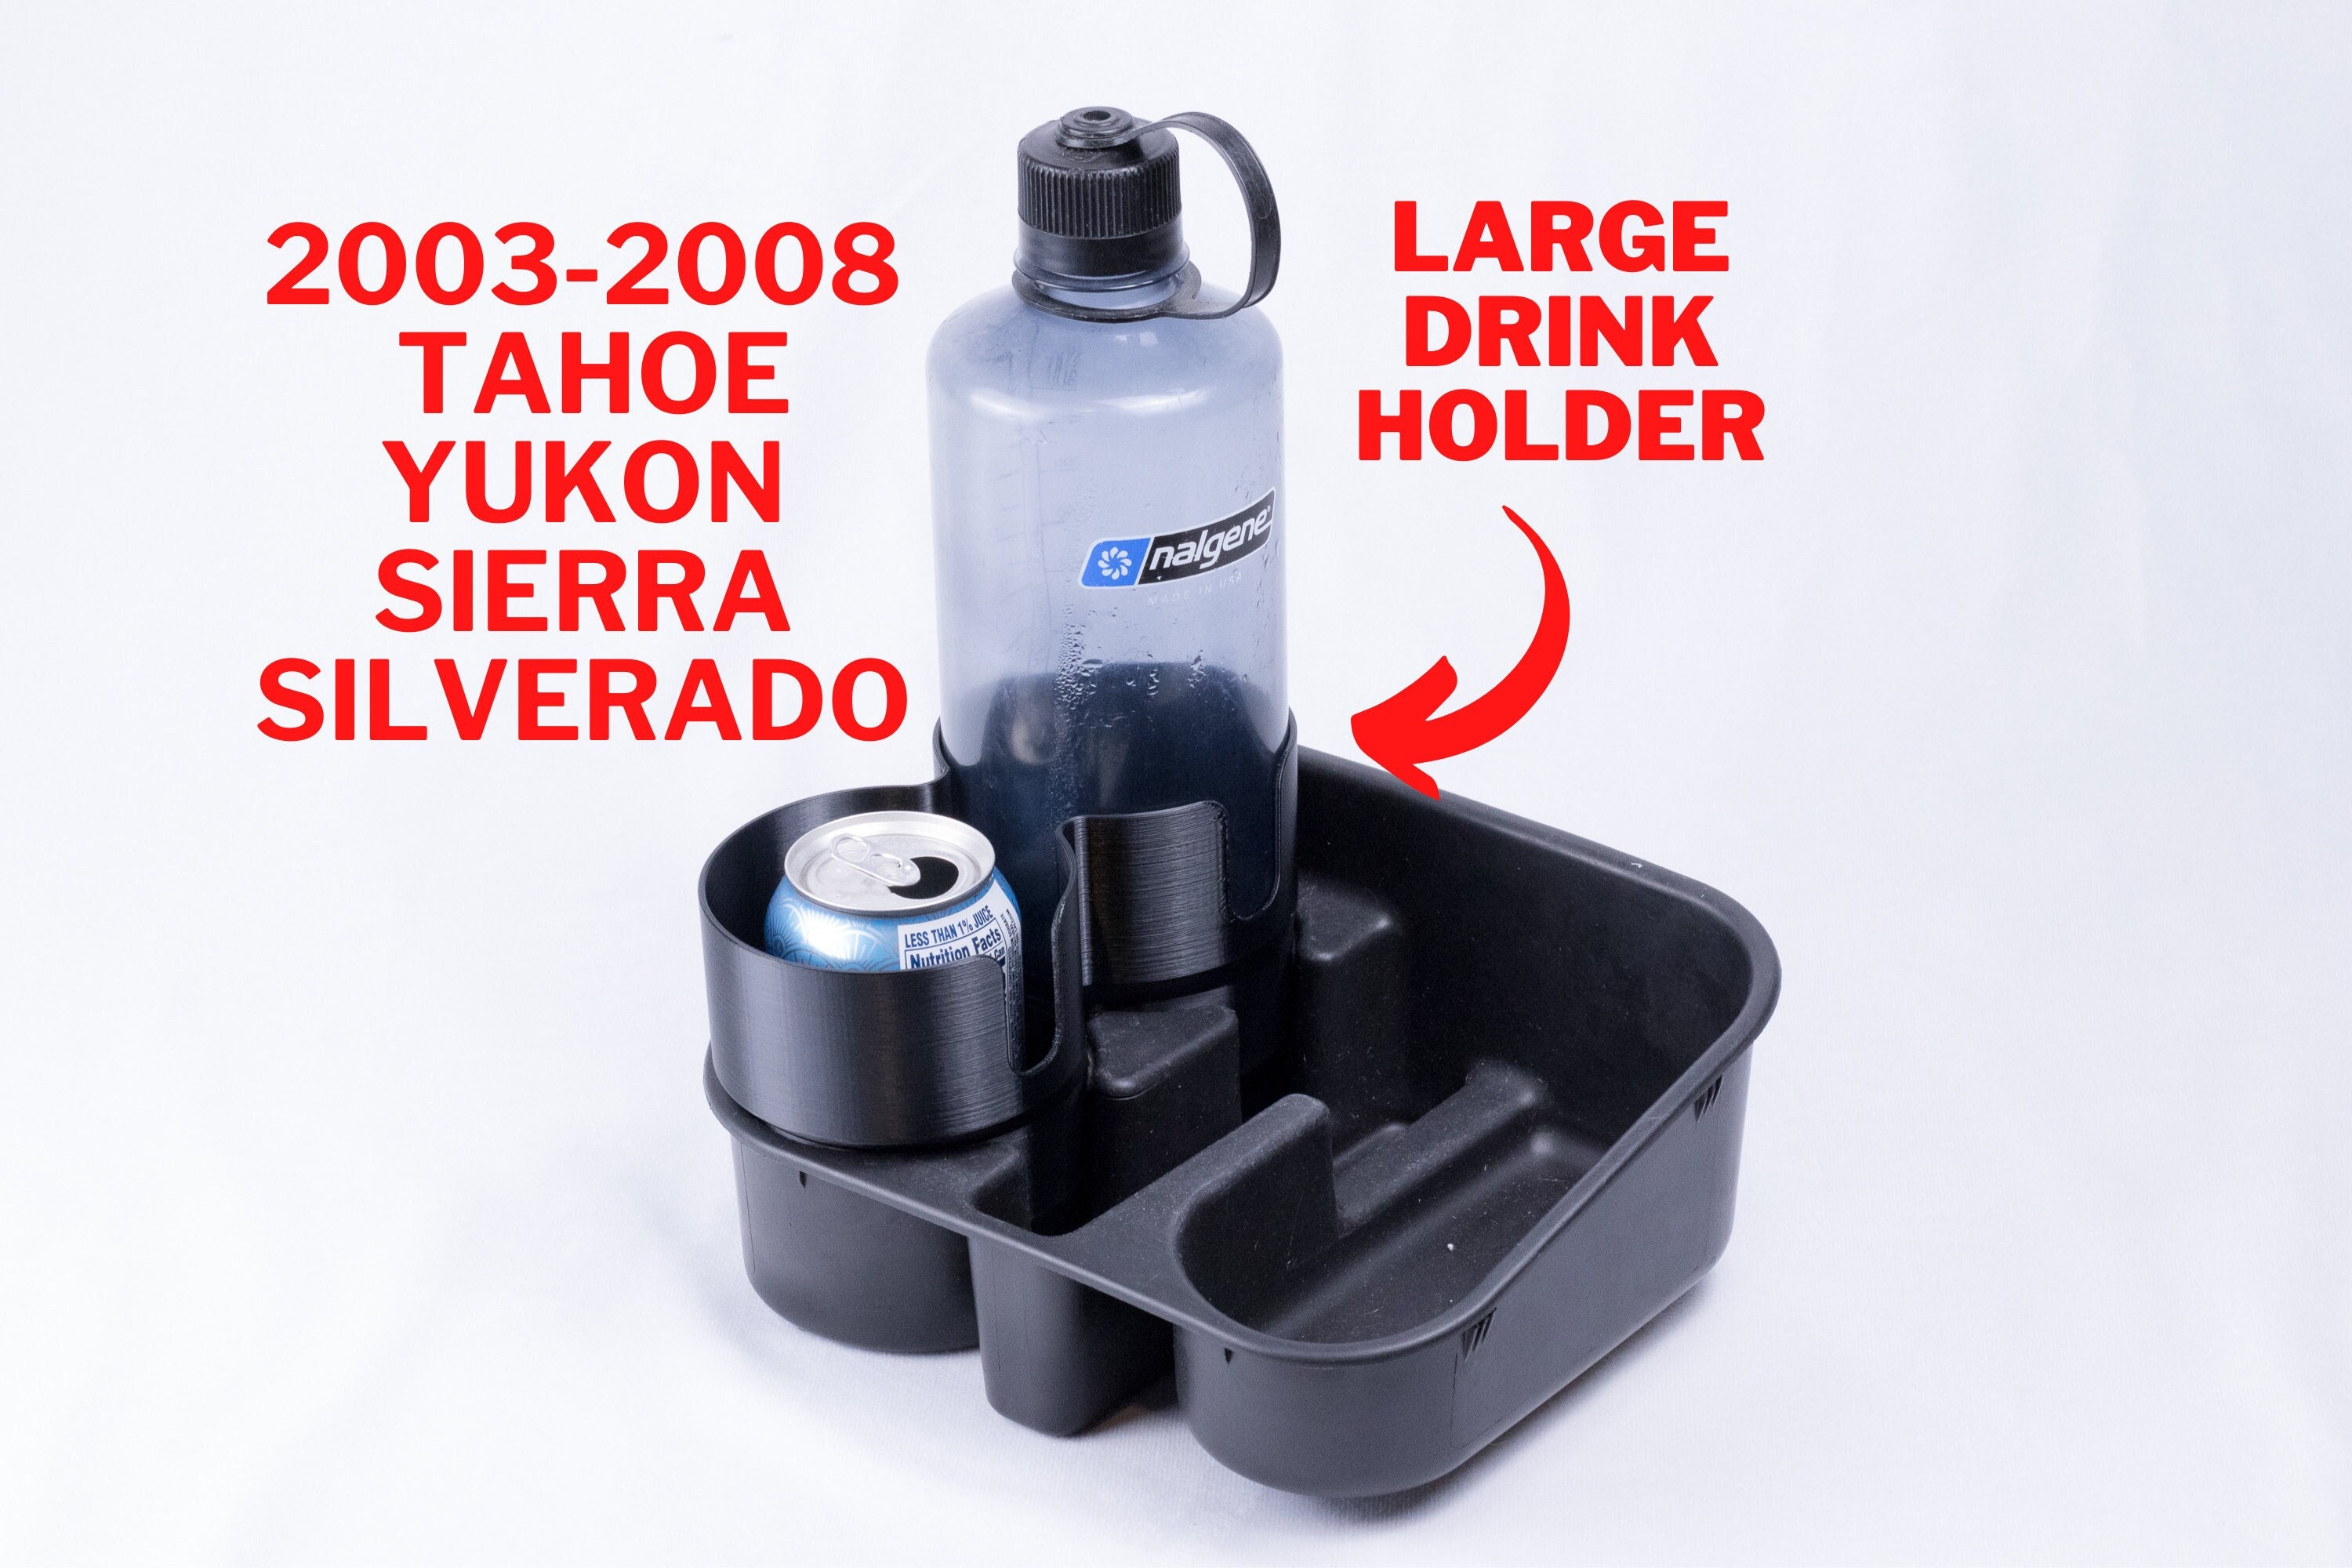 owalaDoes Owala Water Bottle Fit in Cup Holder?, by Usmanali